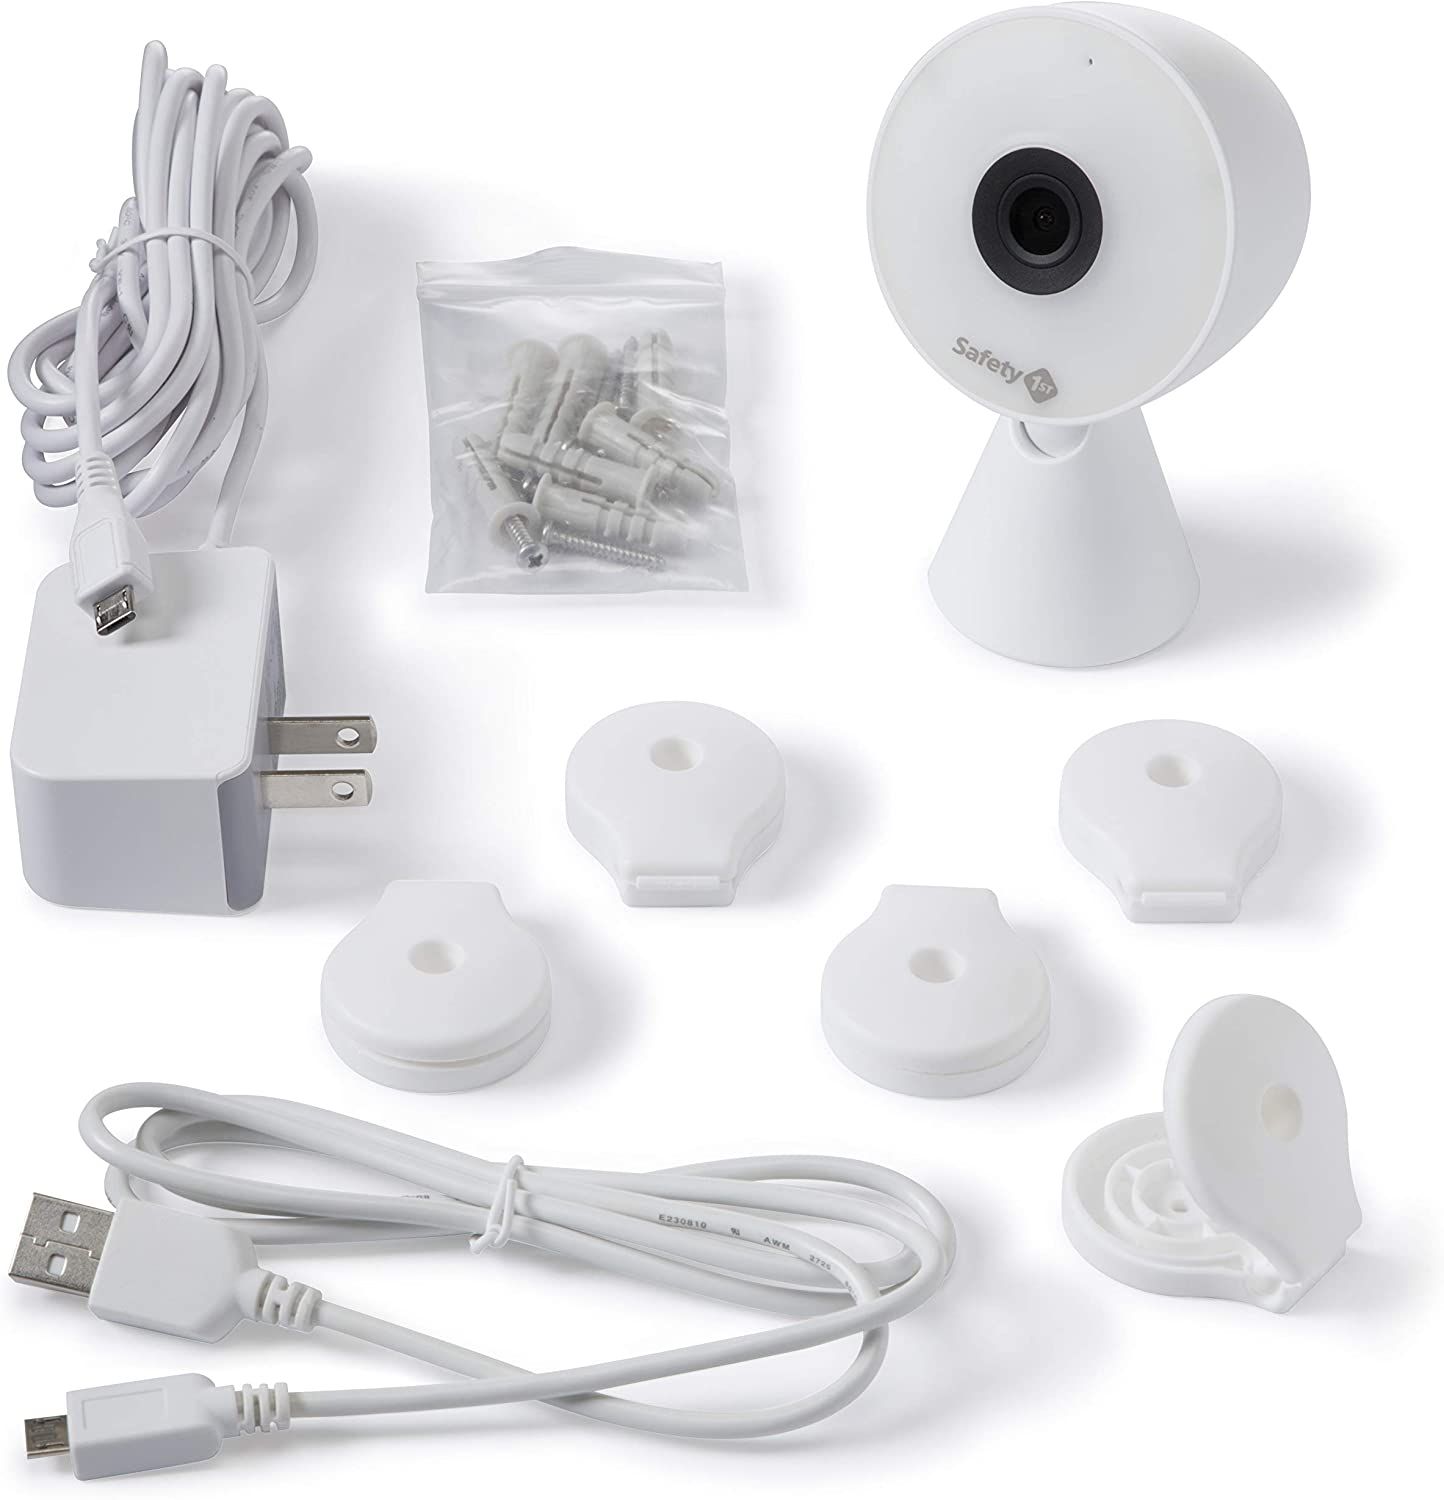 Safety 1st HD WiFi Streaming Baby Monitor box contents